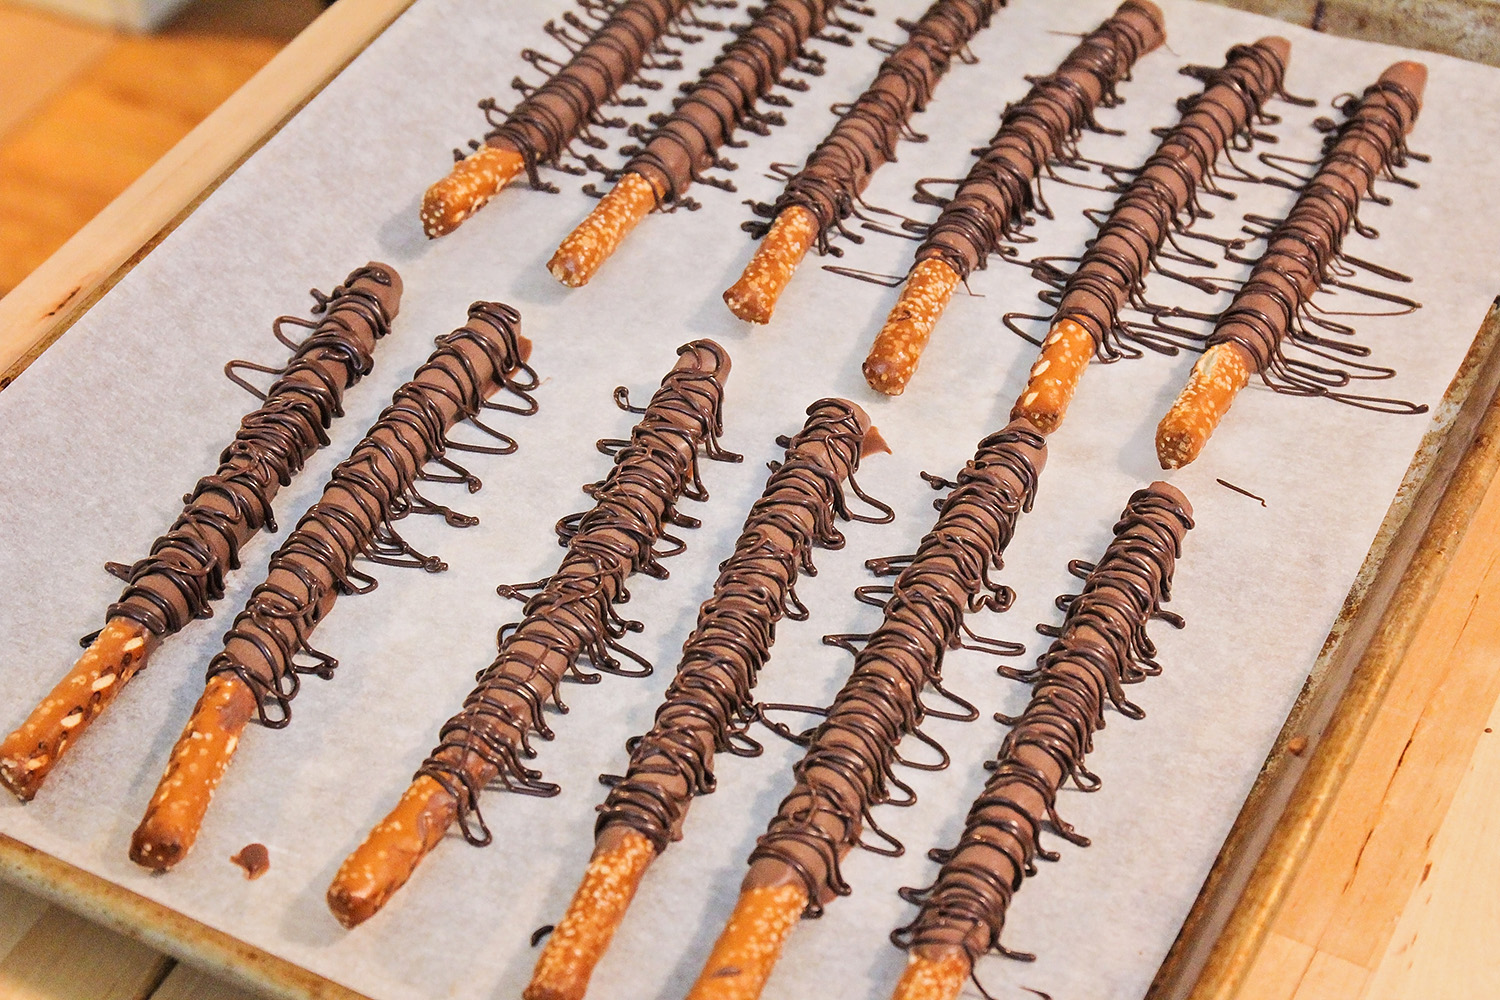 These edible wizard wands are so simple to make, and perfect for a Harry Potter party!